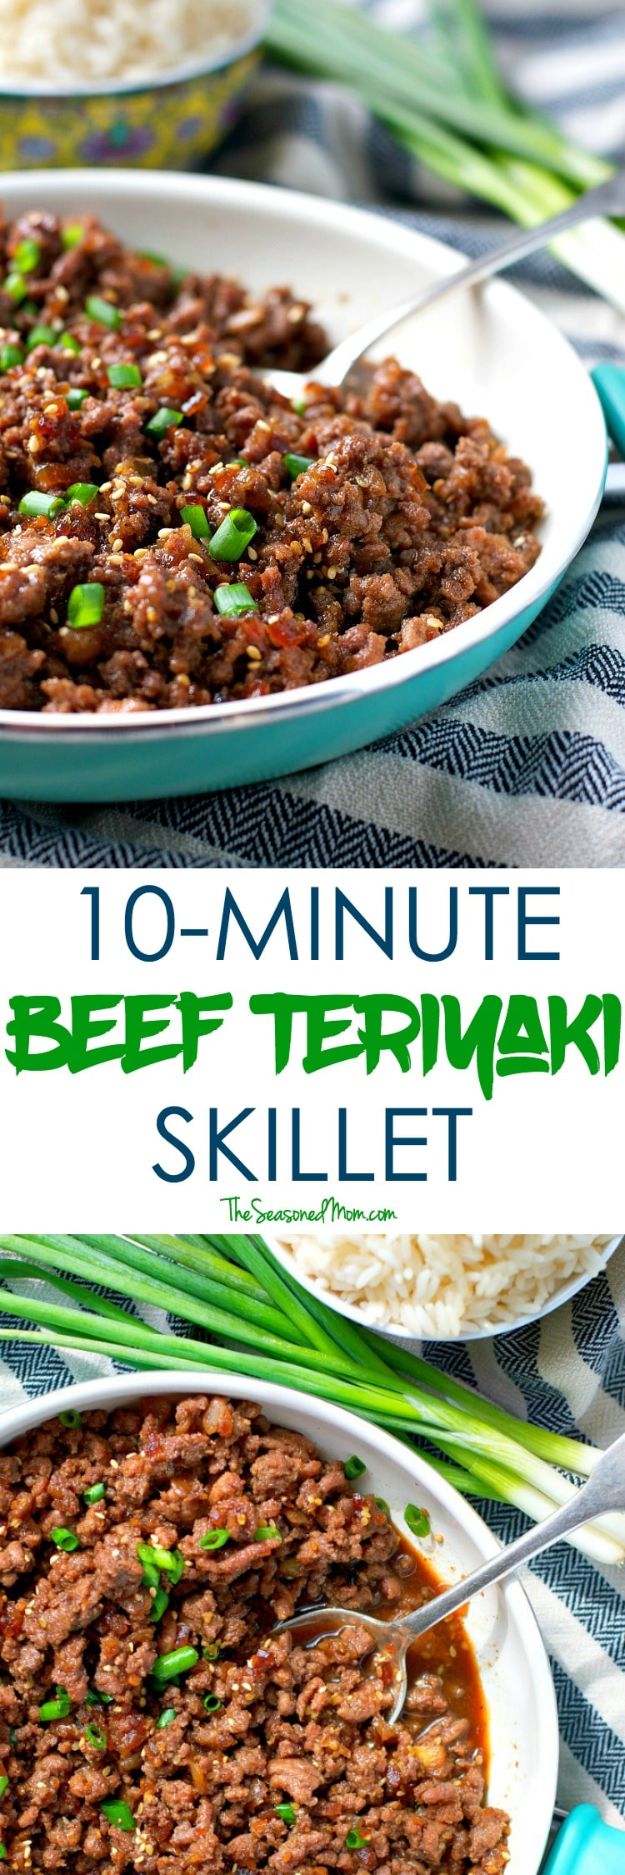 Best Recipes With Ground Beef - 10-Minute Beef Teriyaki Skillet - Easy Dinners and Ground Beef Recipe Ideas - Quick Lunch Salads, Casseroles, Tacos, One Skillet Meals - Healthy Crockpot Foods With Hamburger Meat - Mexican Casserole, Instant Pot Carne Molida, Low Carb and Keto Diet - Rice, Pasta, Potatoes and Crescent Rolls 